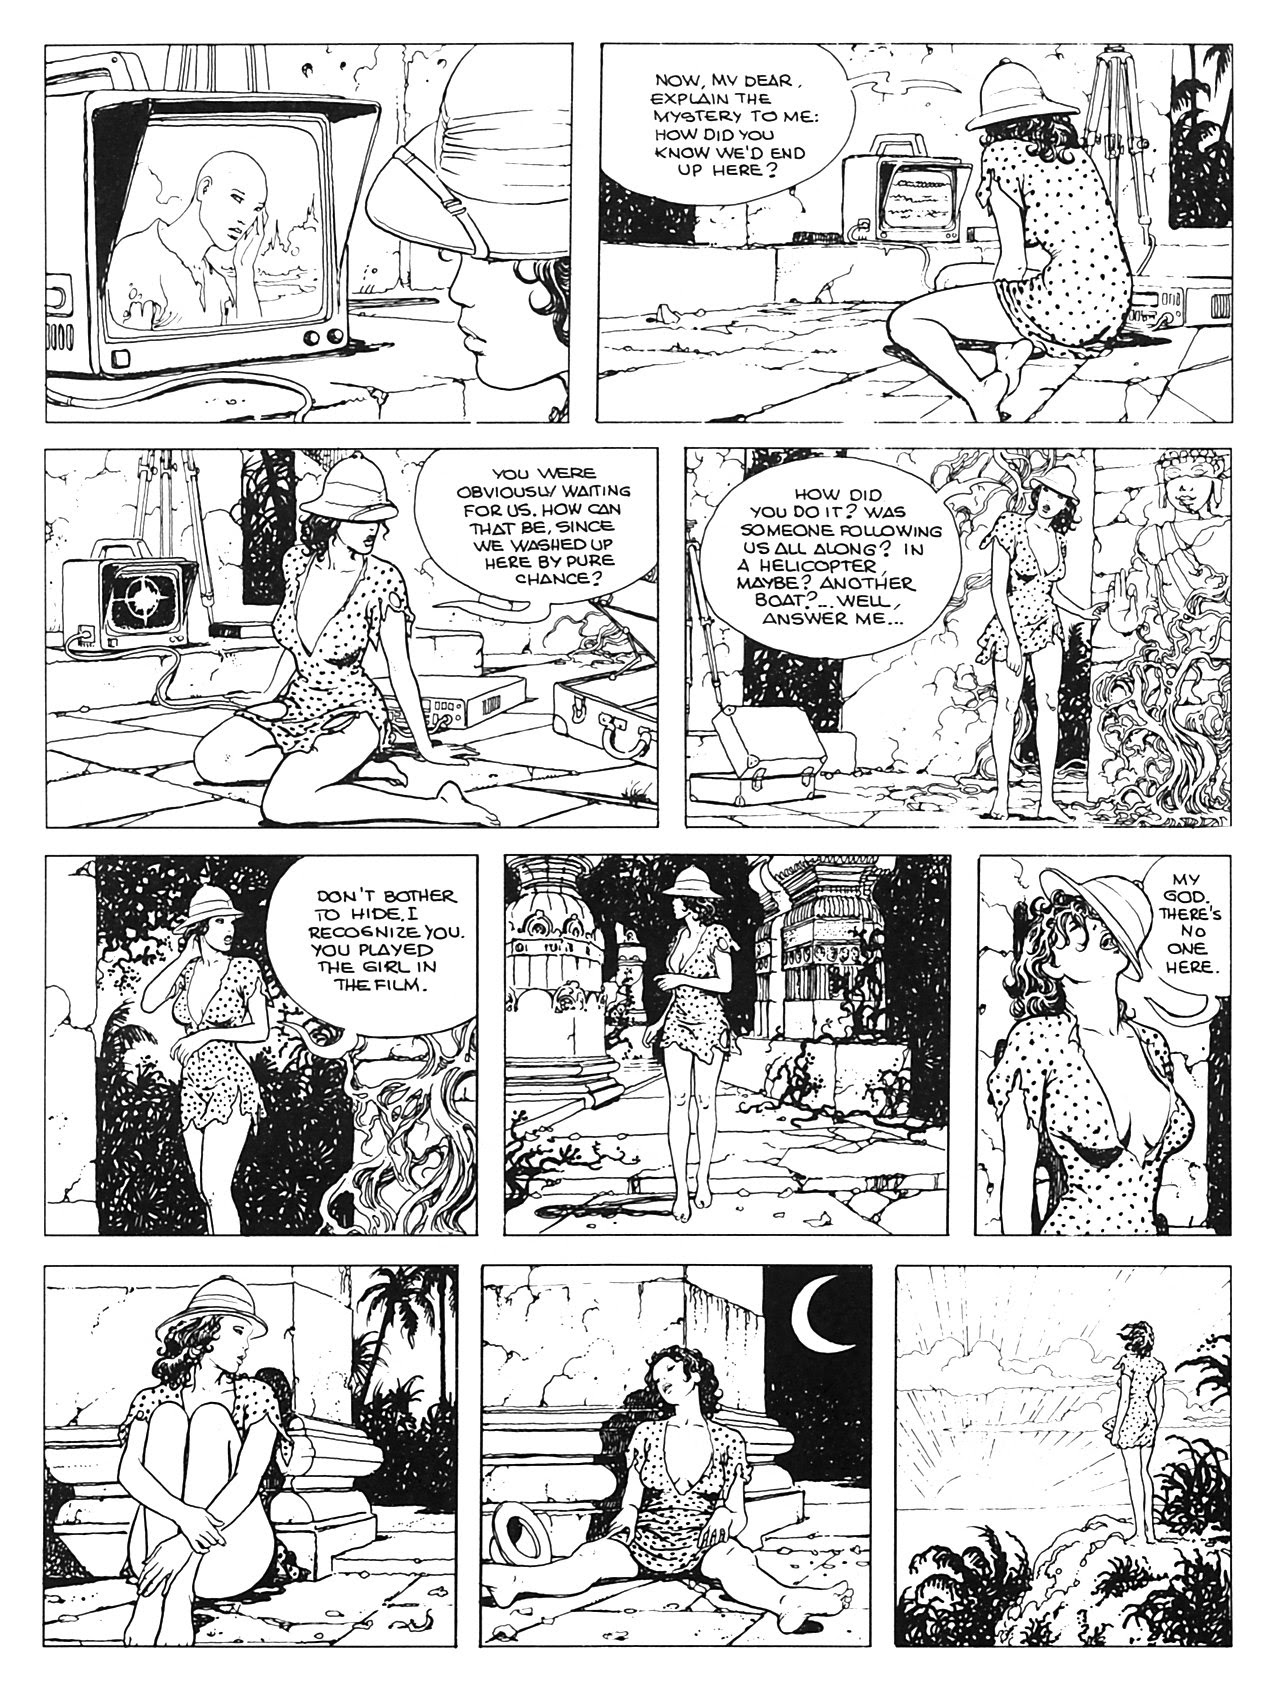 Read online Perchance to dream - The Indian adventures of Giuseppe Bergman comic -  Issue # TPB - 81